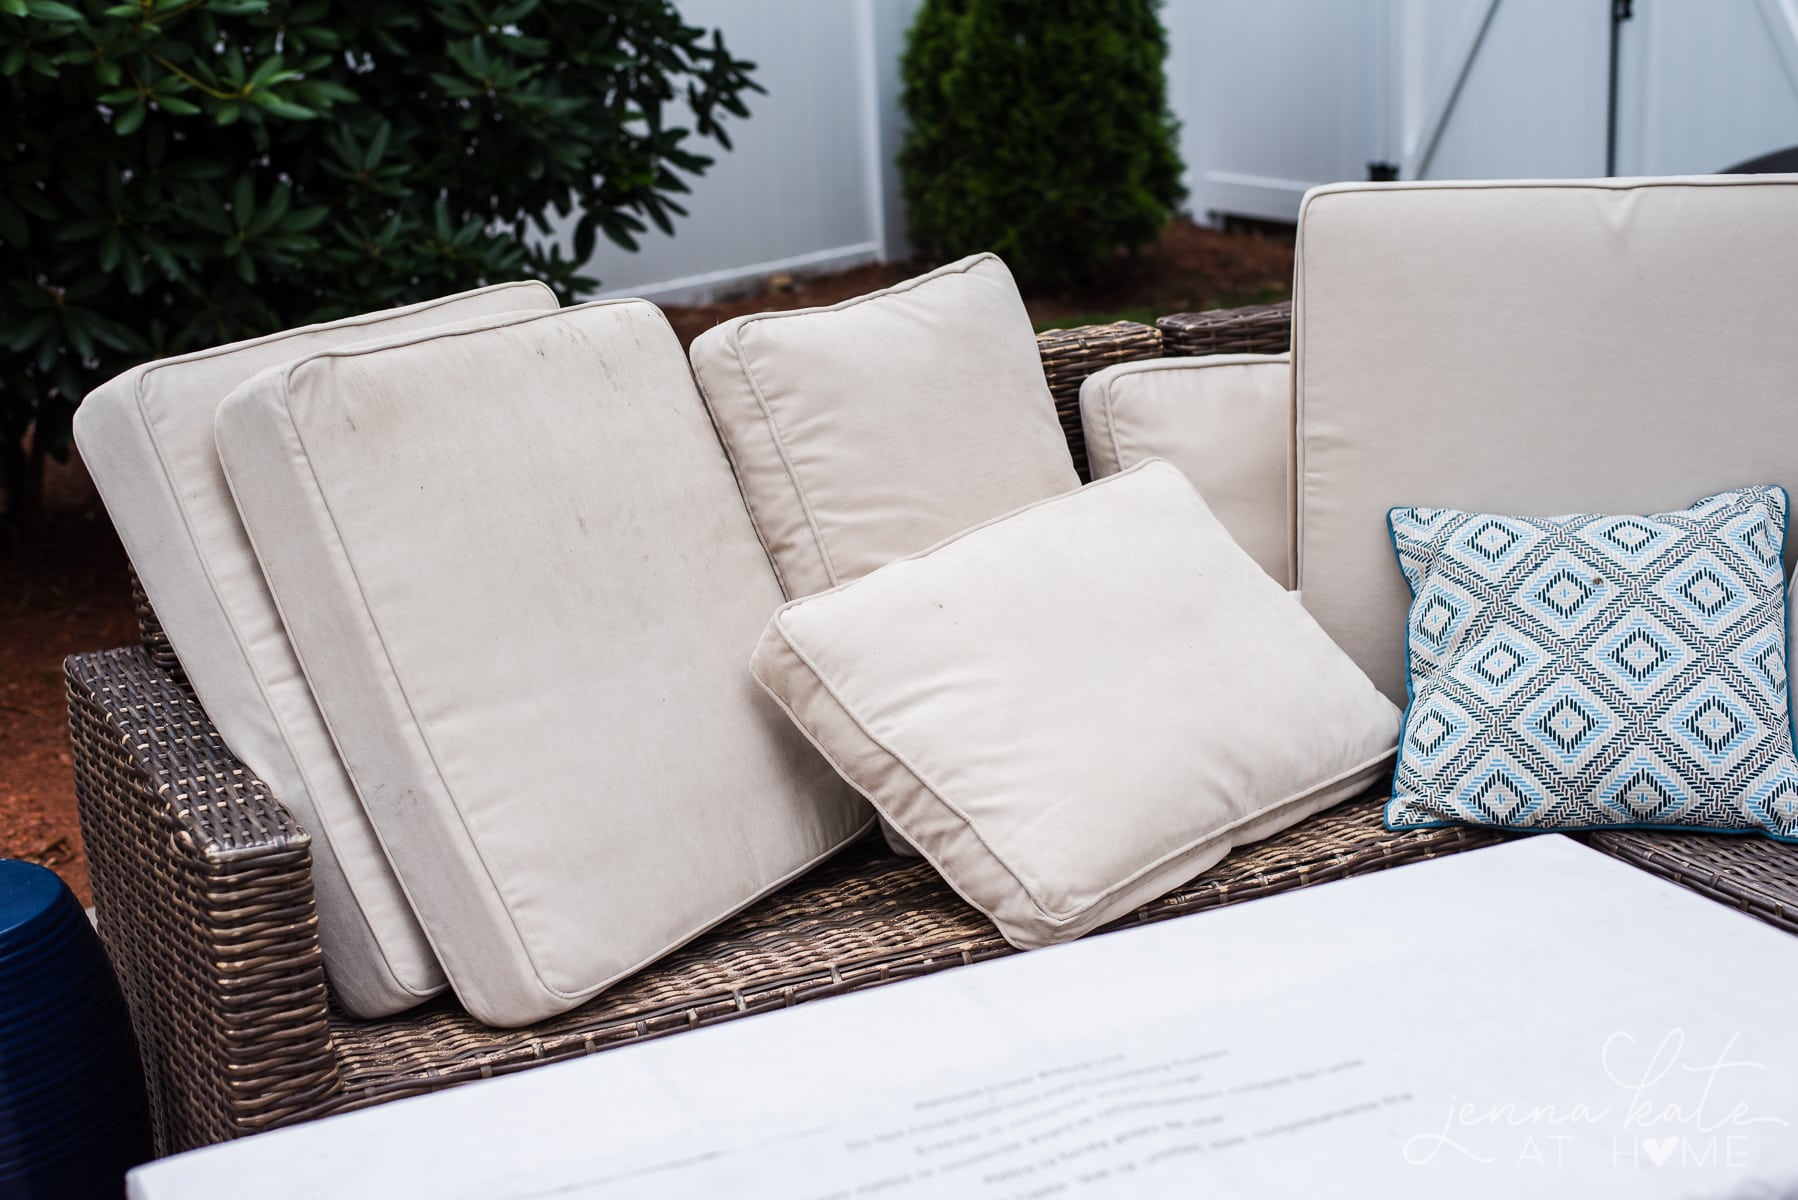 How To Clean Outdoor Cushions Jenna, How Do I Wash Outdoor Cushion Covers